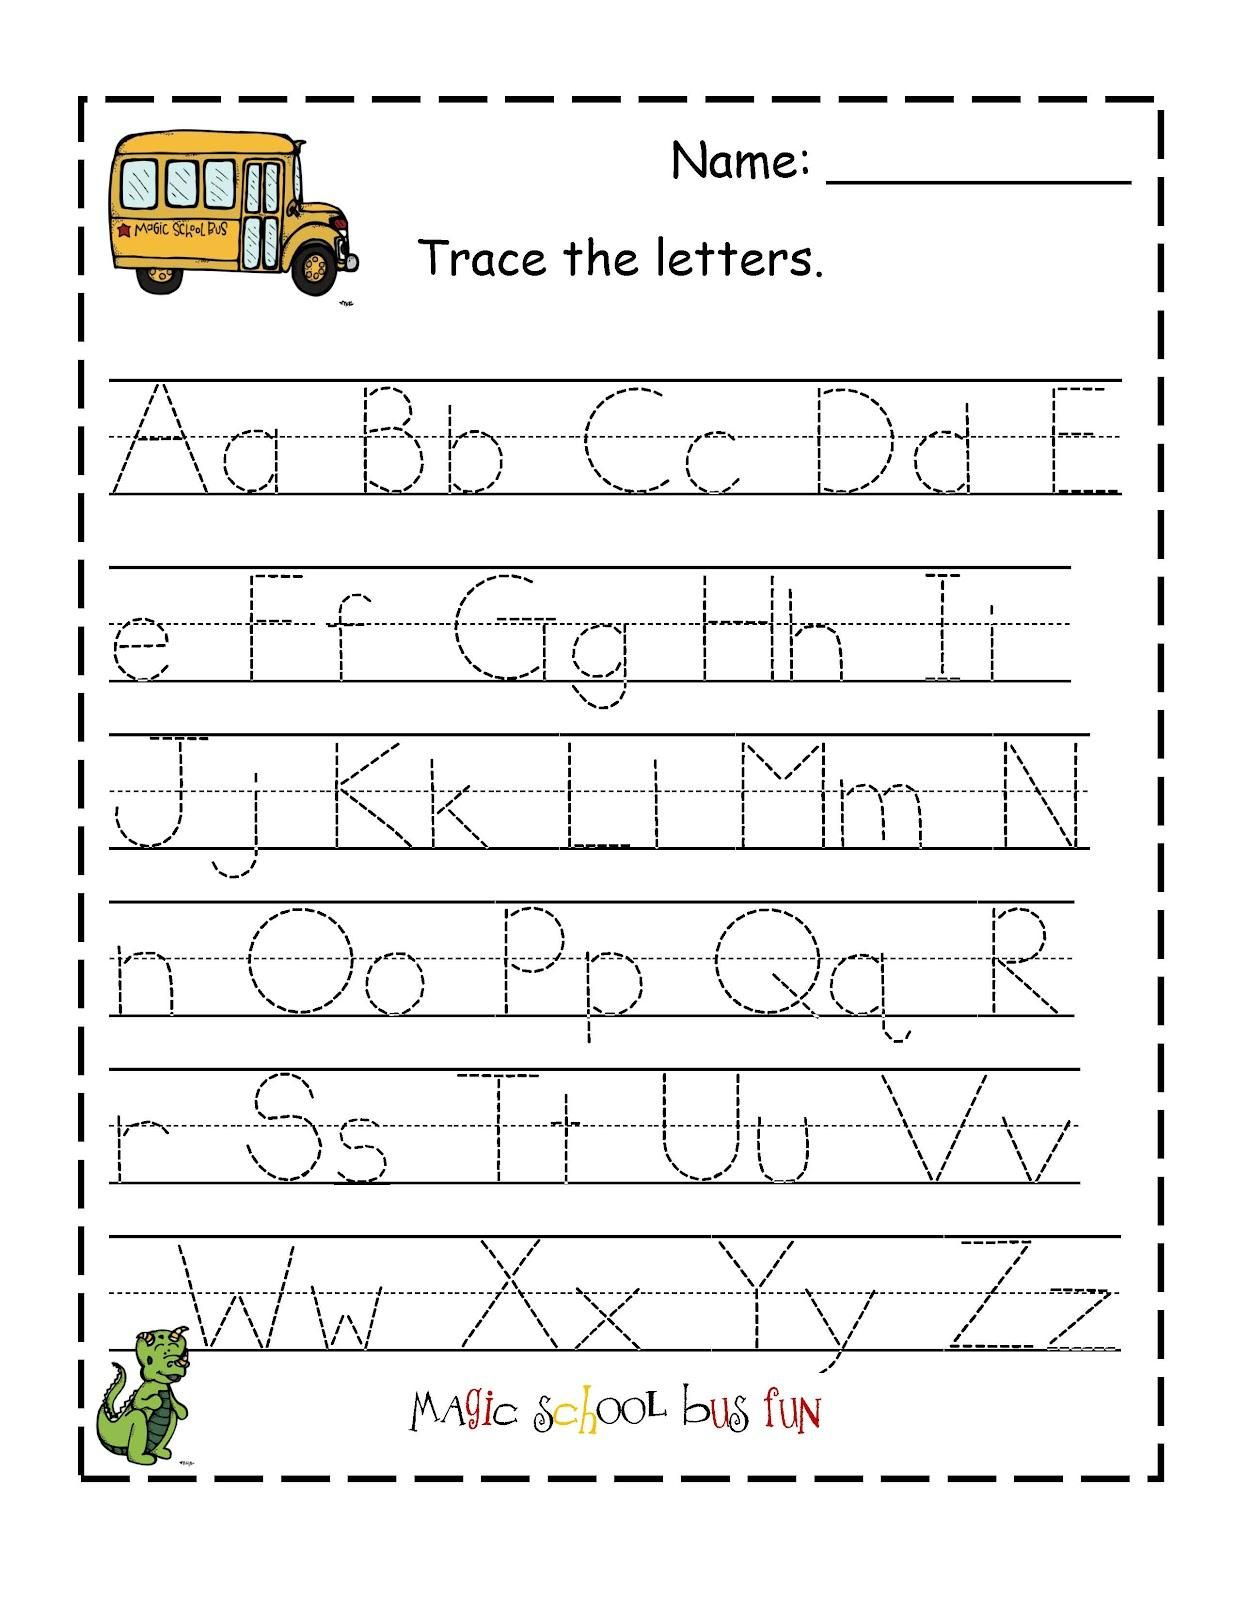 Free Printable Abc Tracing Worksheets #2 | Preschool with Tracing Letters Worksheets Kindergarten